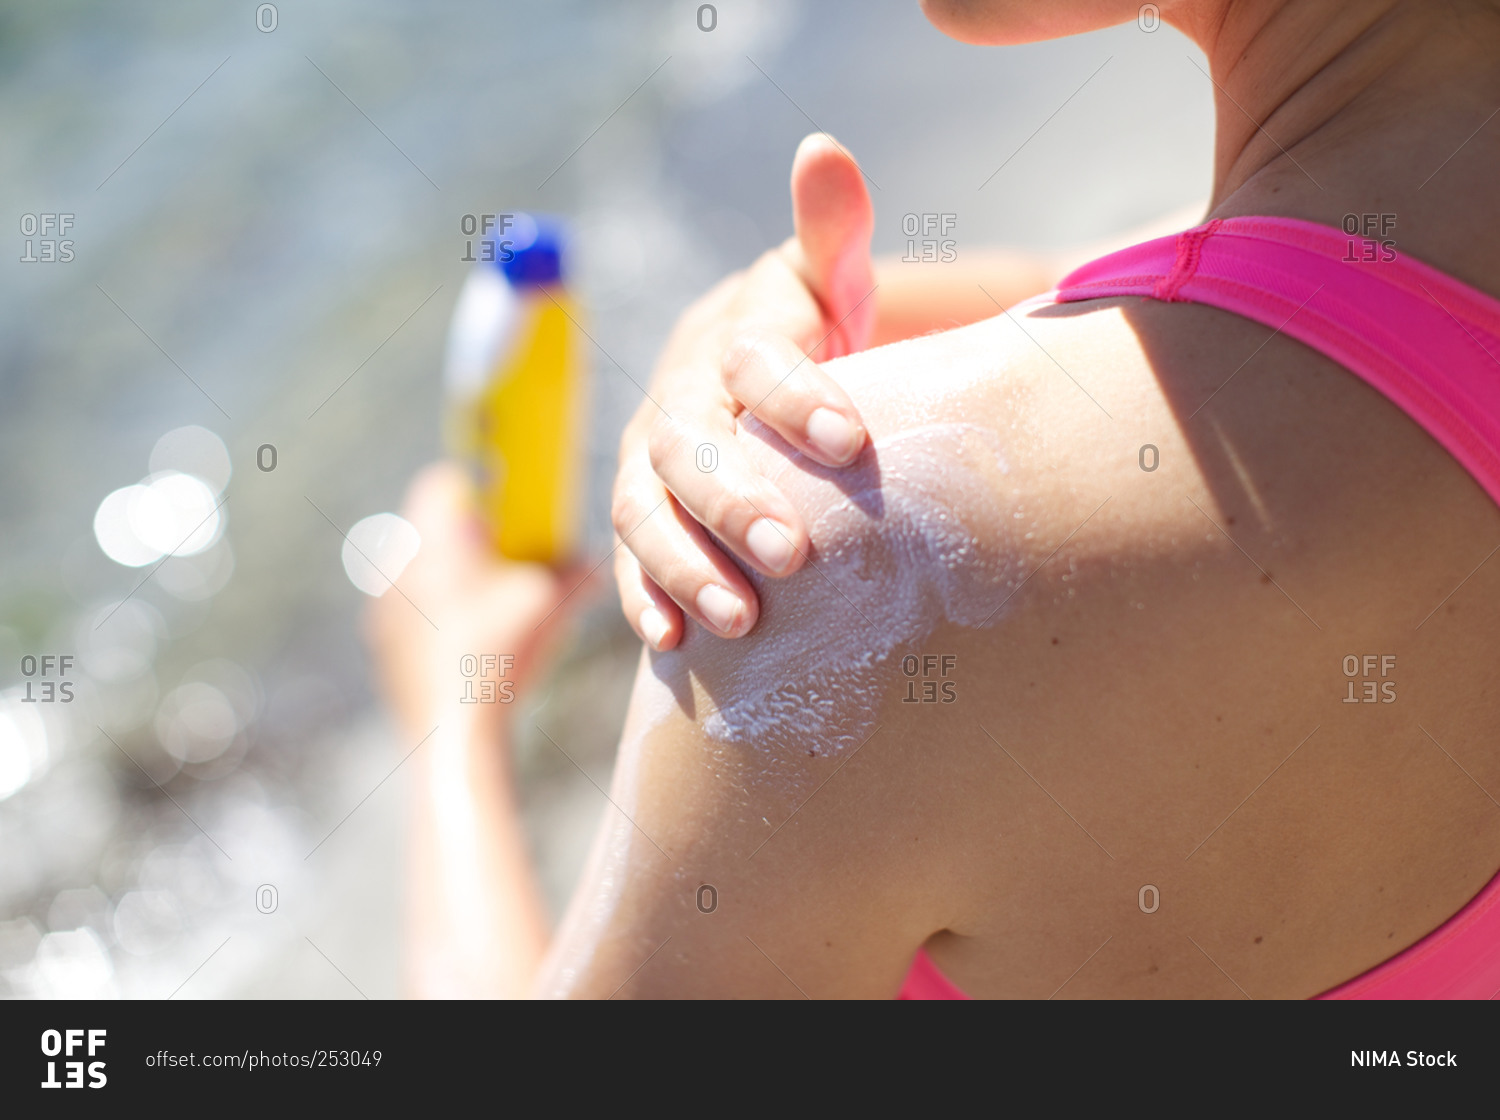 Woman applying sun lotion to her shoulder